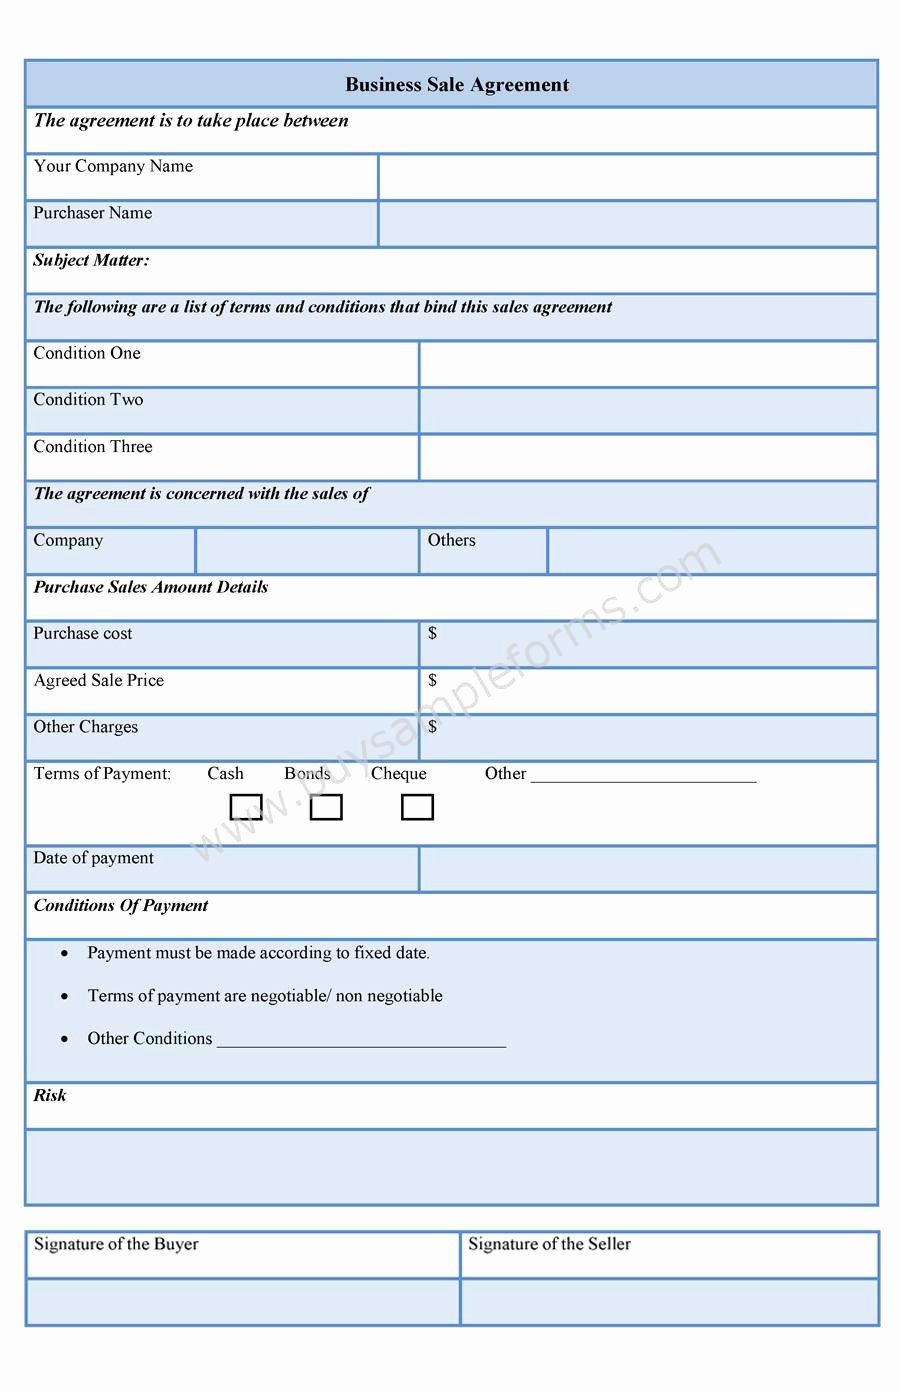 Business Sale Agreement Template Awesome Business Sale Agreement form